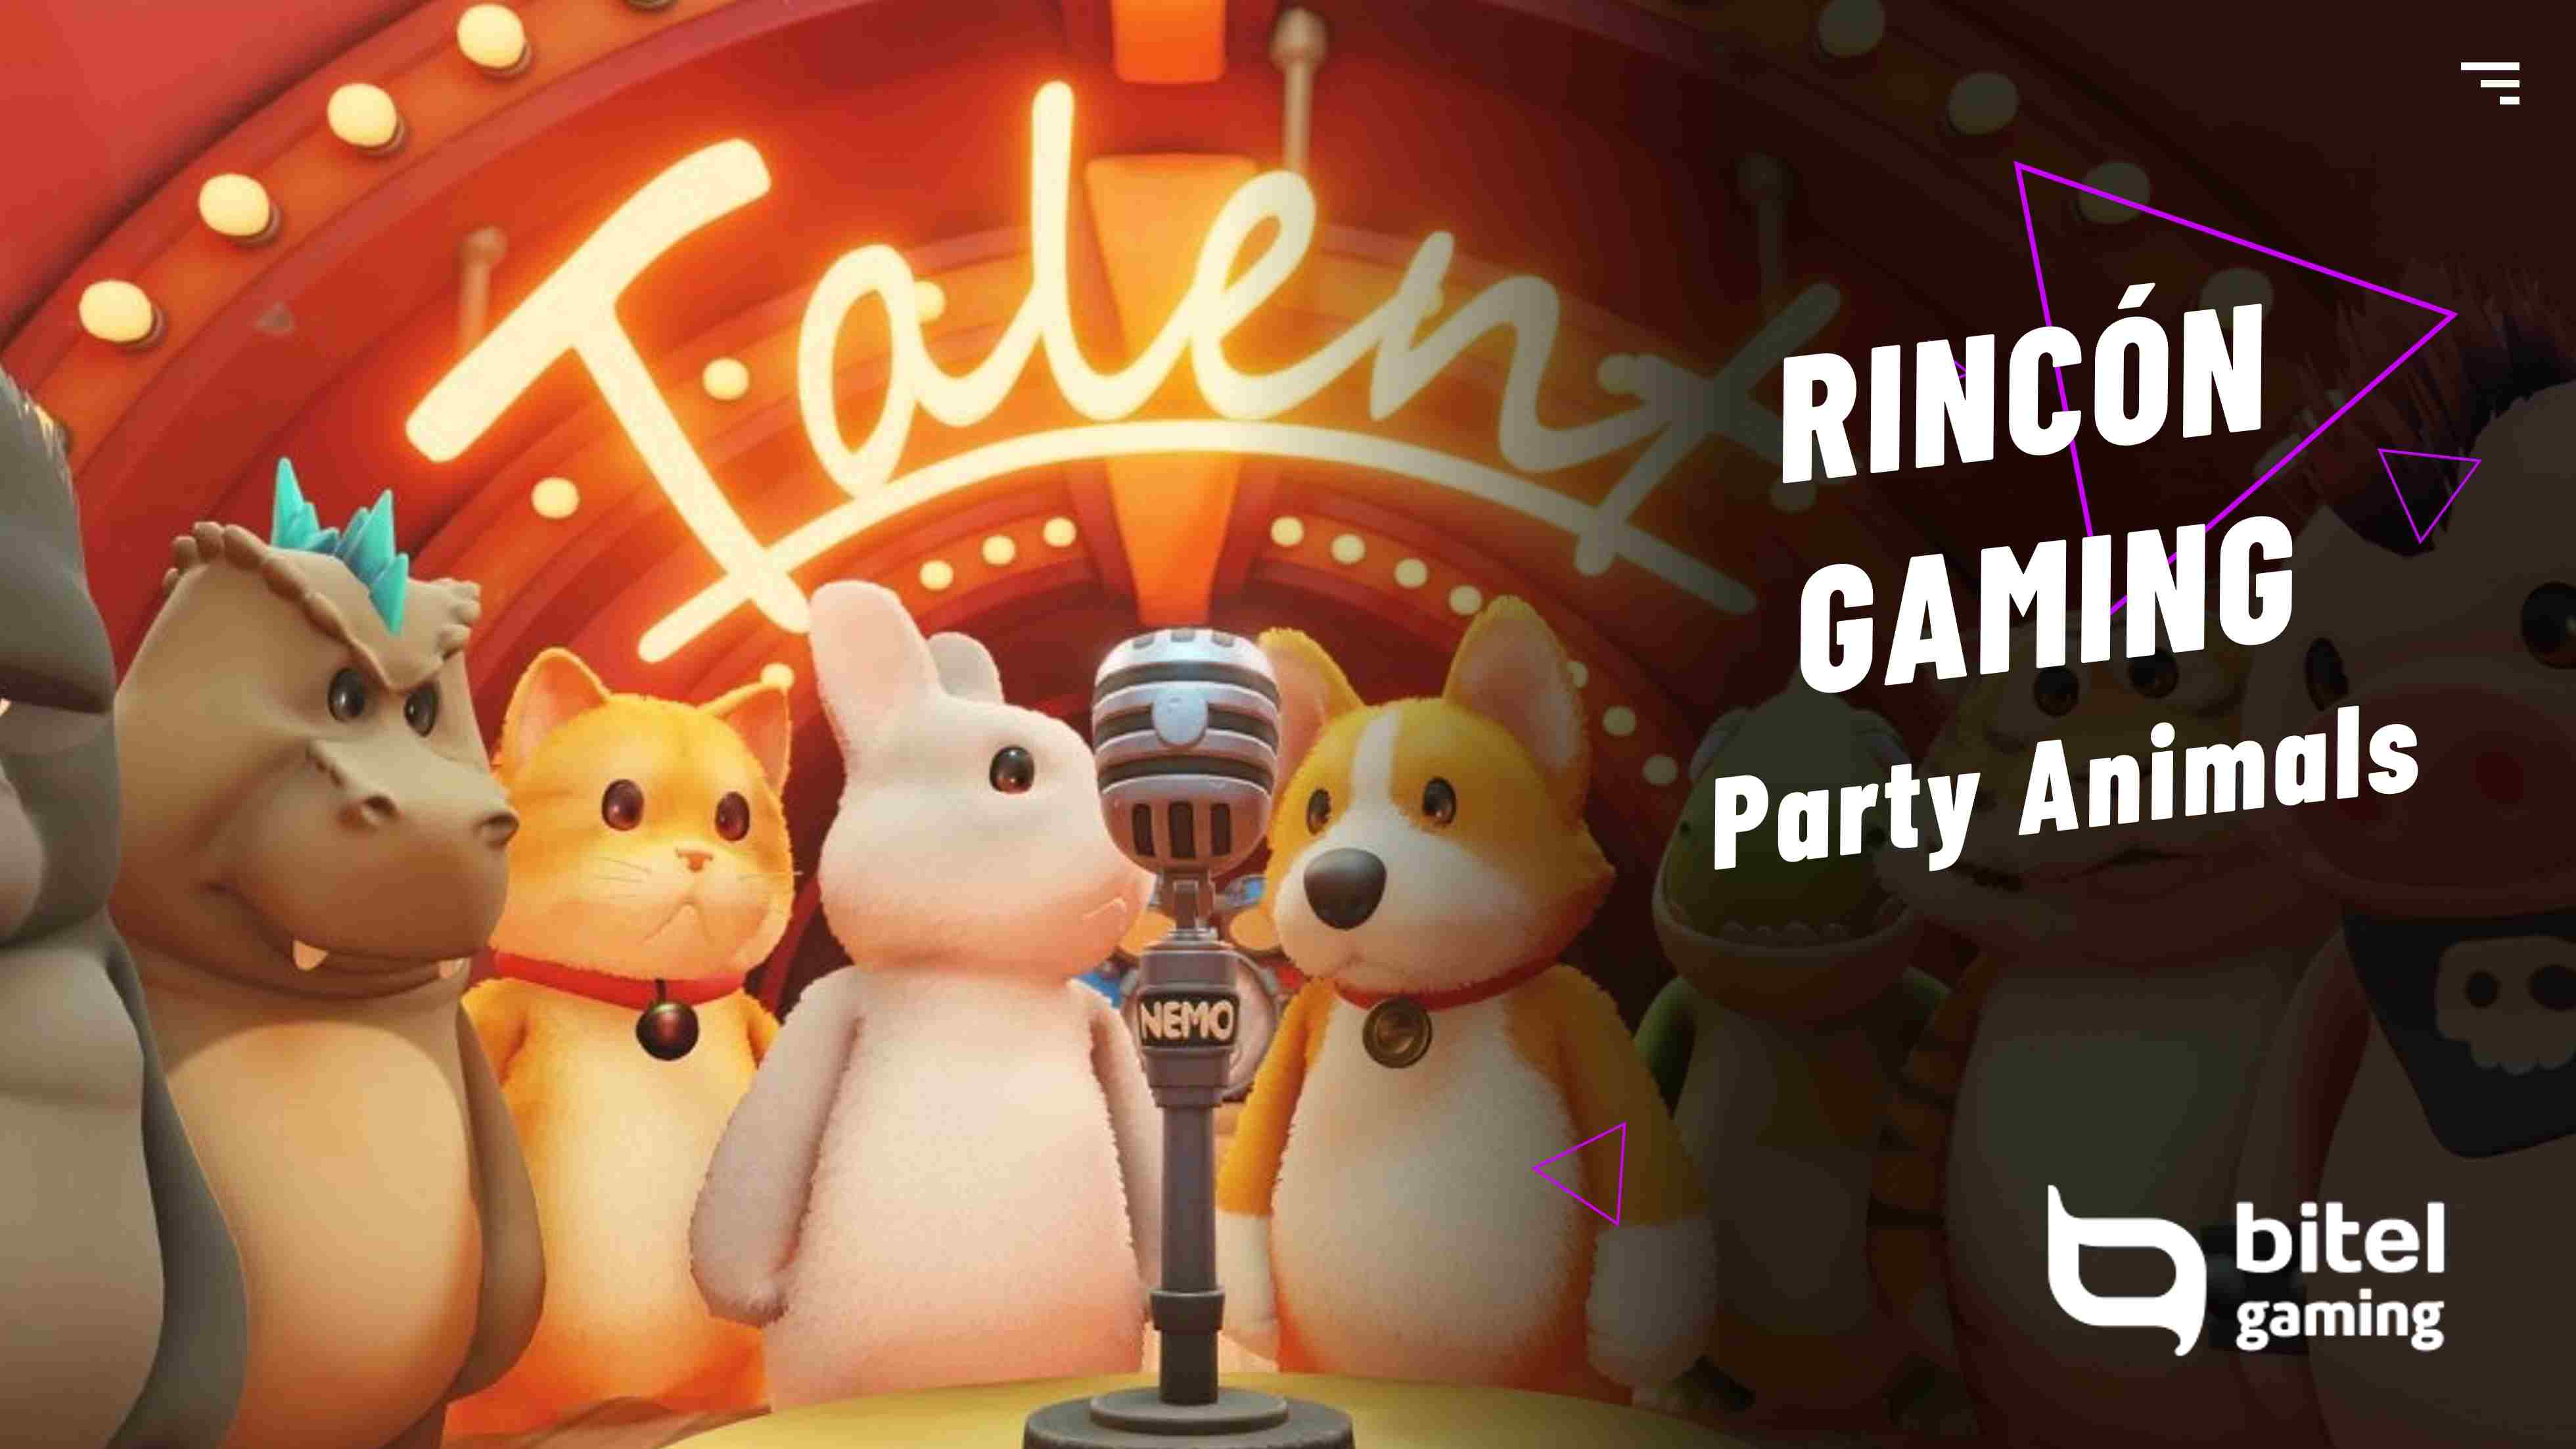 Rincon Gaming - Party Animals